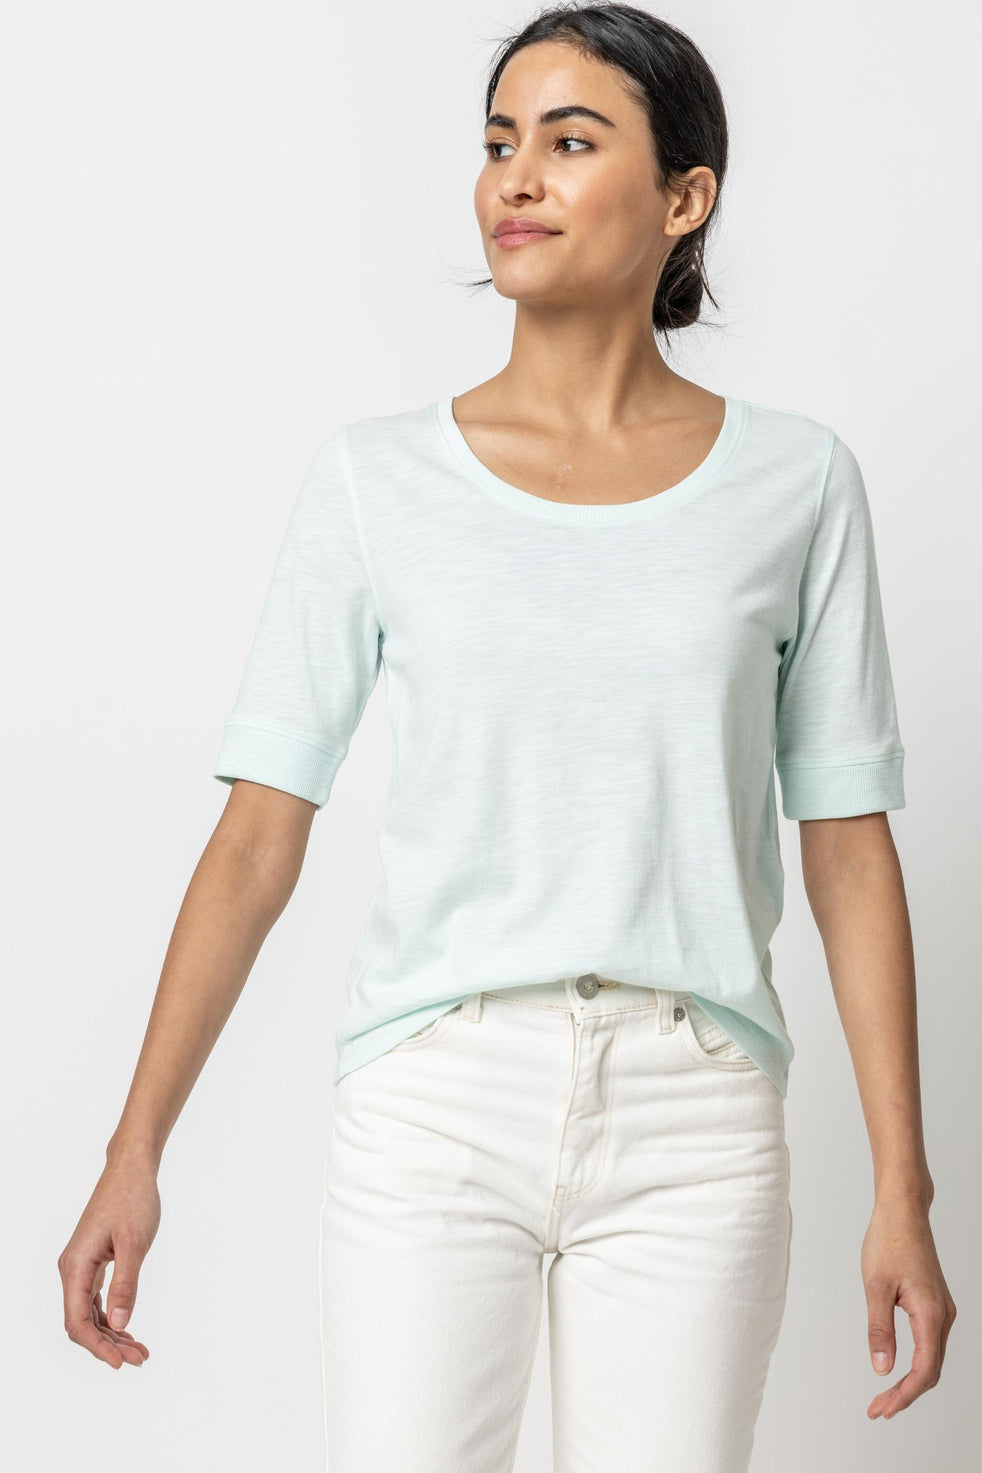 Tops, Dresses, Sweaters, Bottoms and More | Shop All at Lilla P